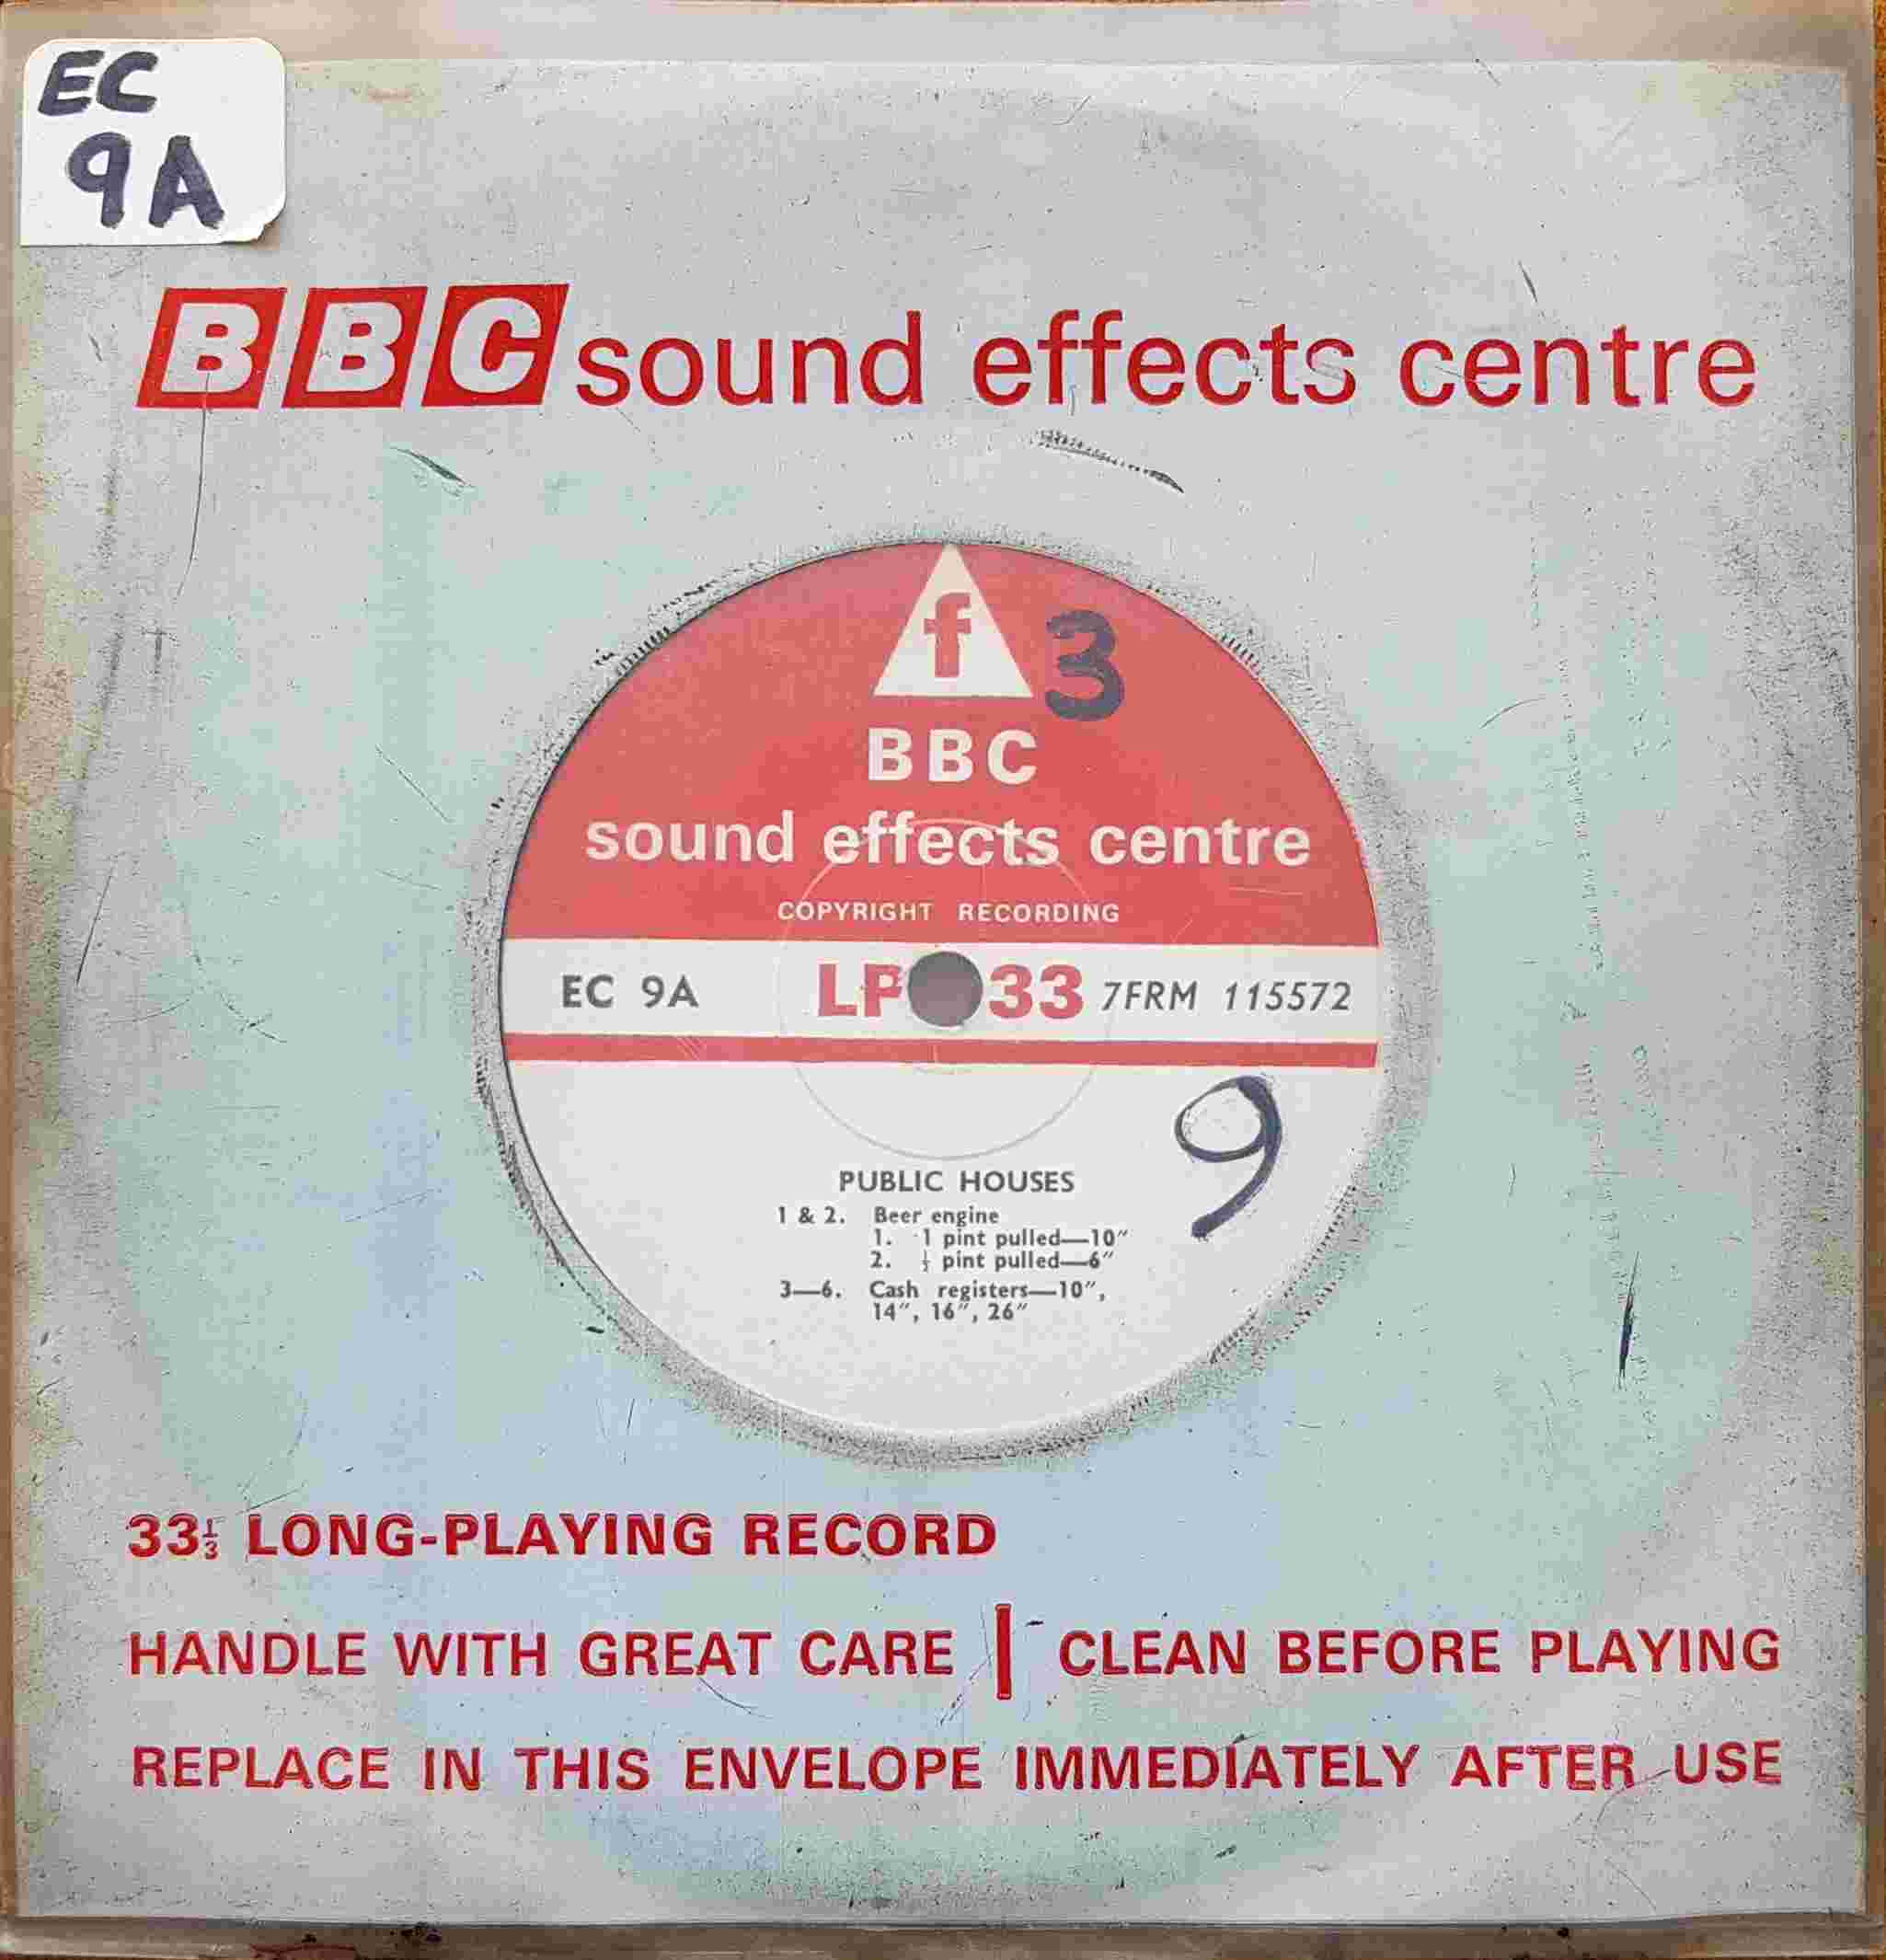 Picture of EC 9A Public houses by artist Not registered from the BBC singles - Records and Tapes library